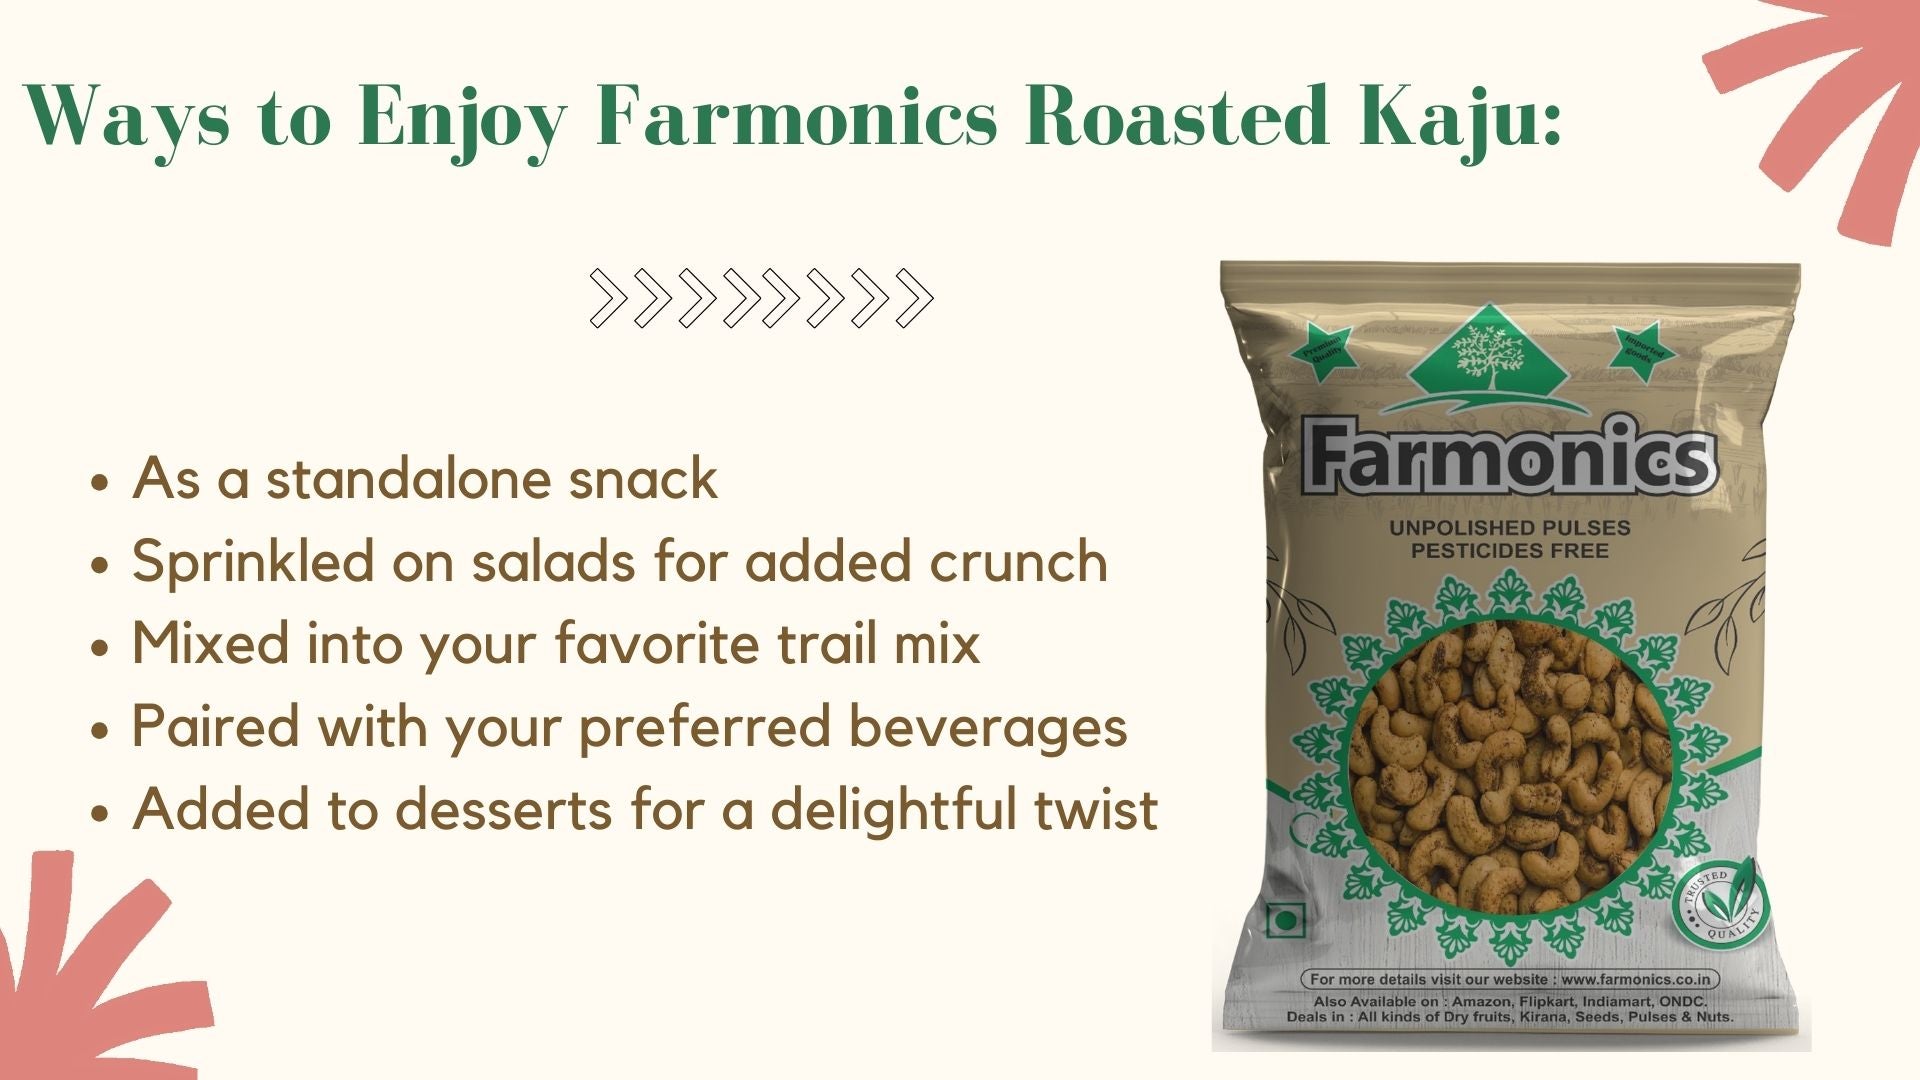 here are lit of ways in which you can enjoy farmonics premium quality roasted kaju